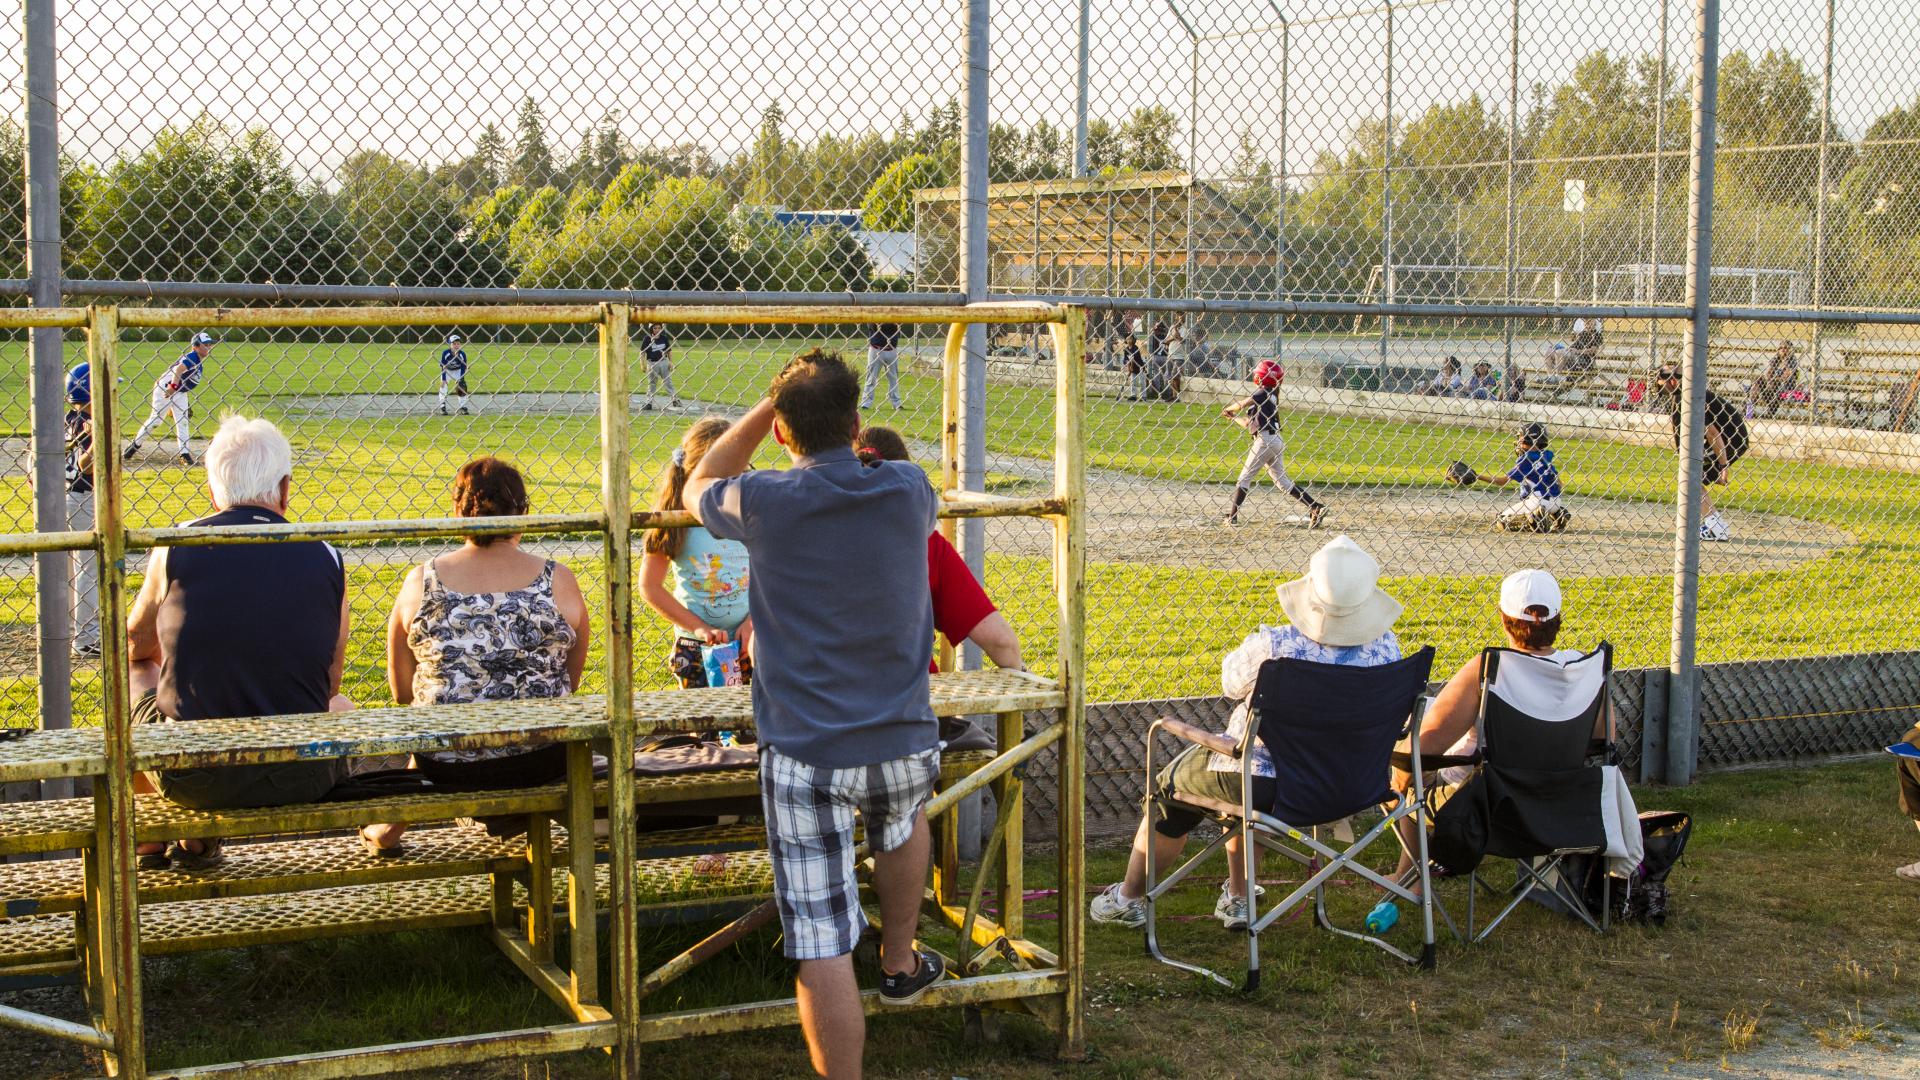 A crowd of people watch a baseball game from the other side of the fence on bleachers and lawn chairs at the Albion Sports Complex.